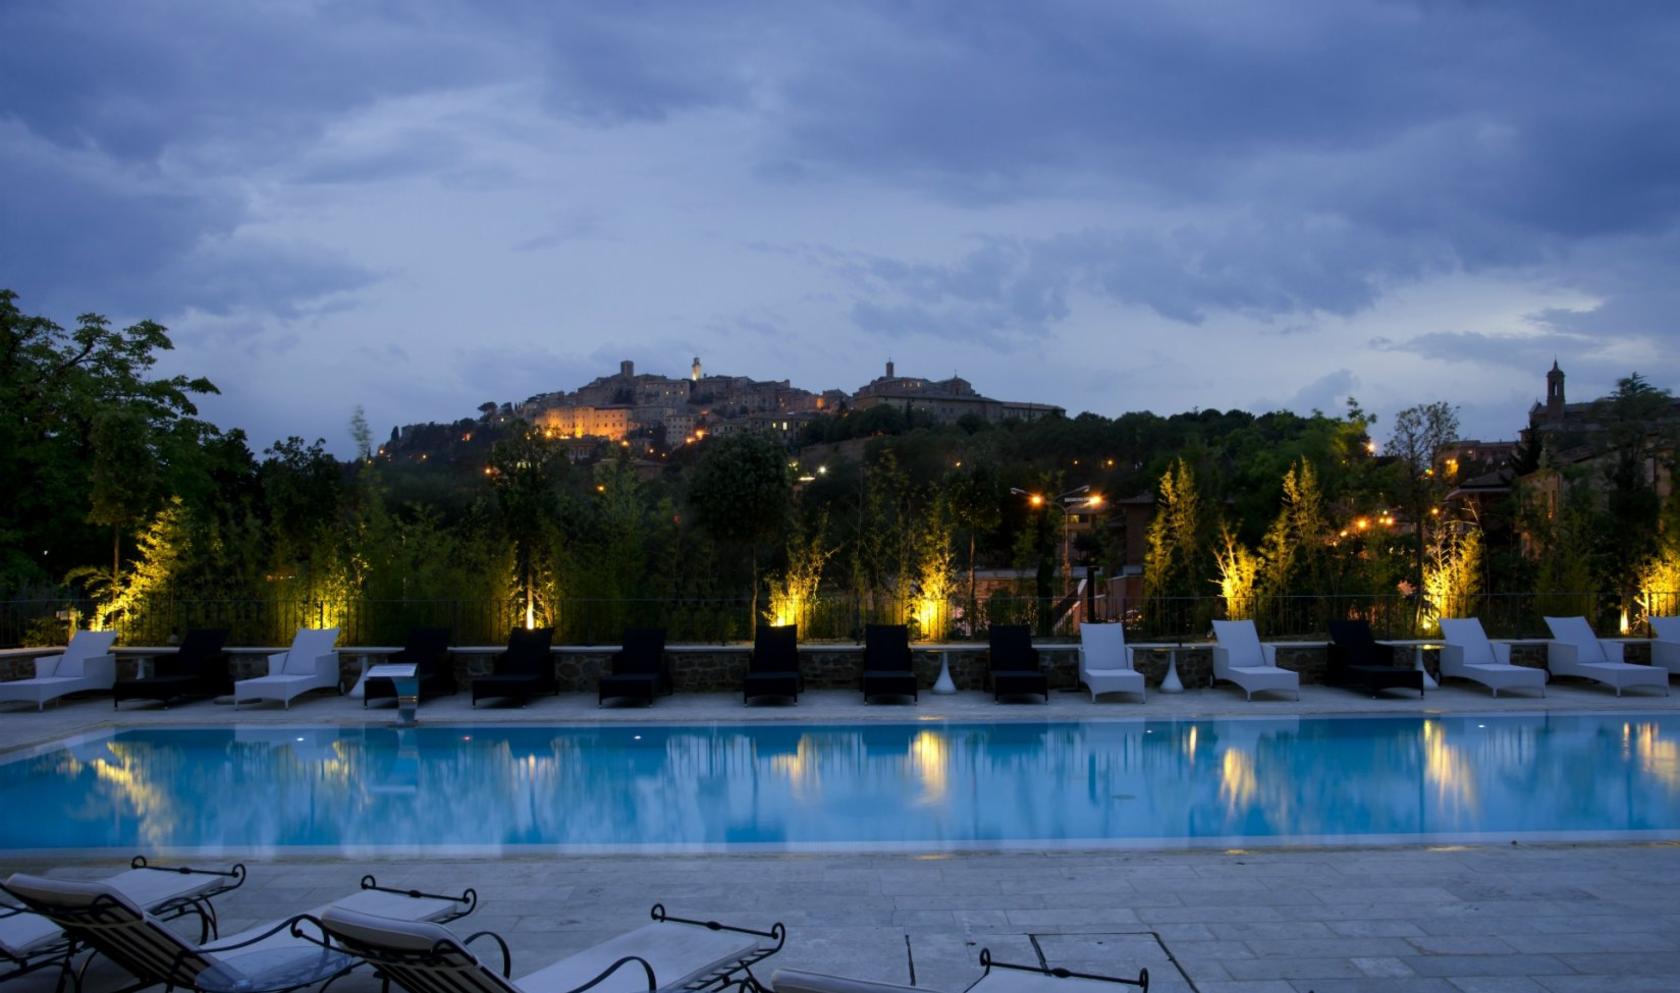 Toscana Immobiliare - Charming hotel, with a mysterious glamor and the evocative atmosphere, located in the heart of the land of Vino Nobile di Montepulciano in Tuscany.